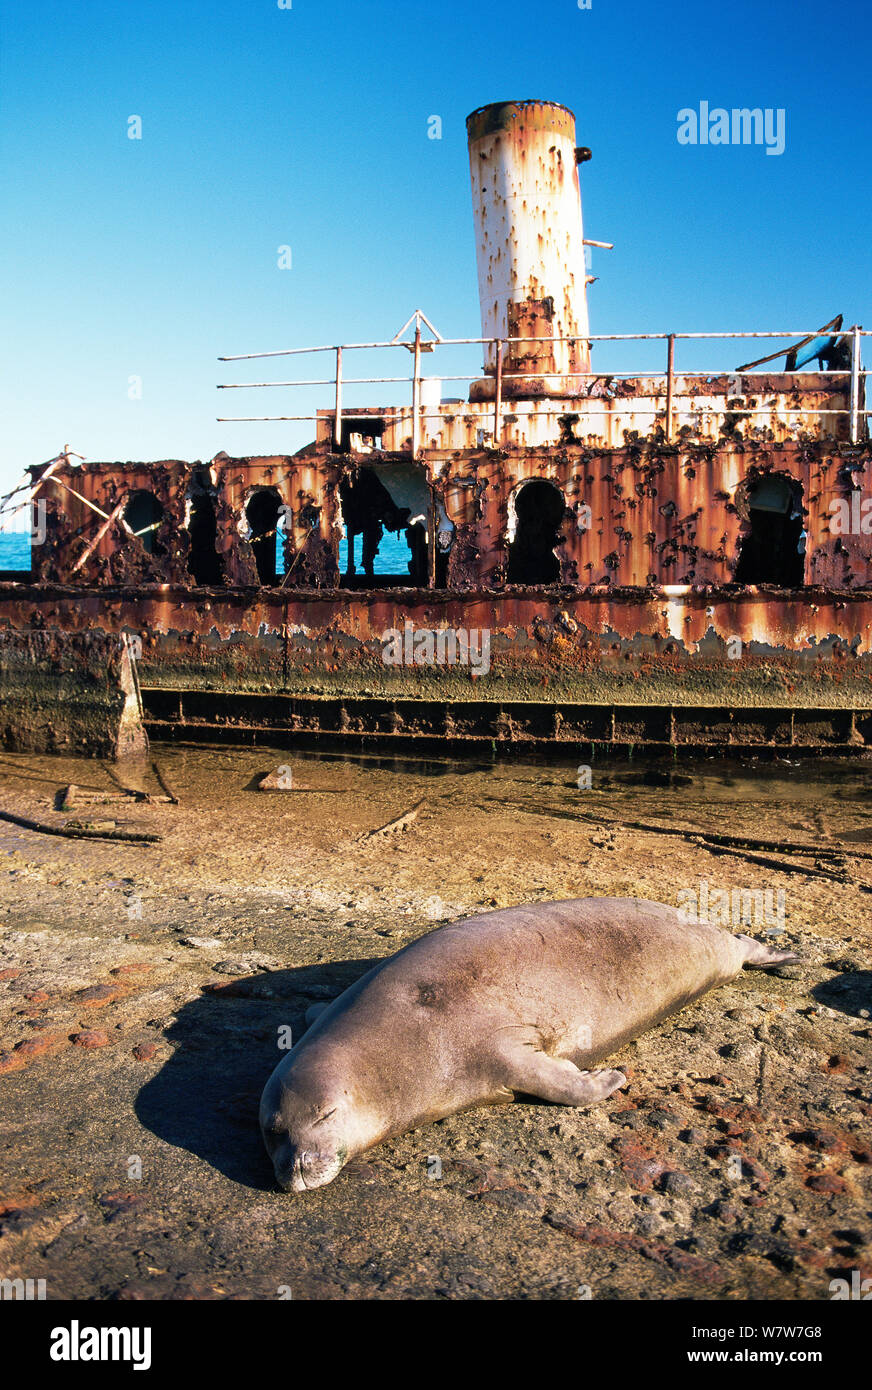 Hawaiian Monk seal (Monachus schauinslandi) sleeping on the deck of a wrecked barge. Midway atoll. Central Pacific. Stock Photo